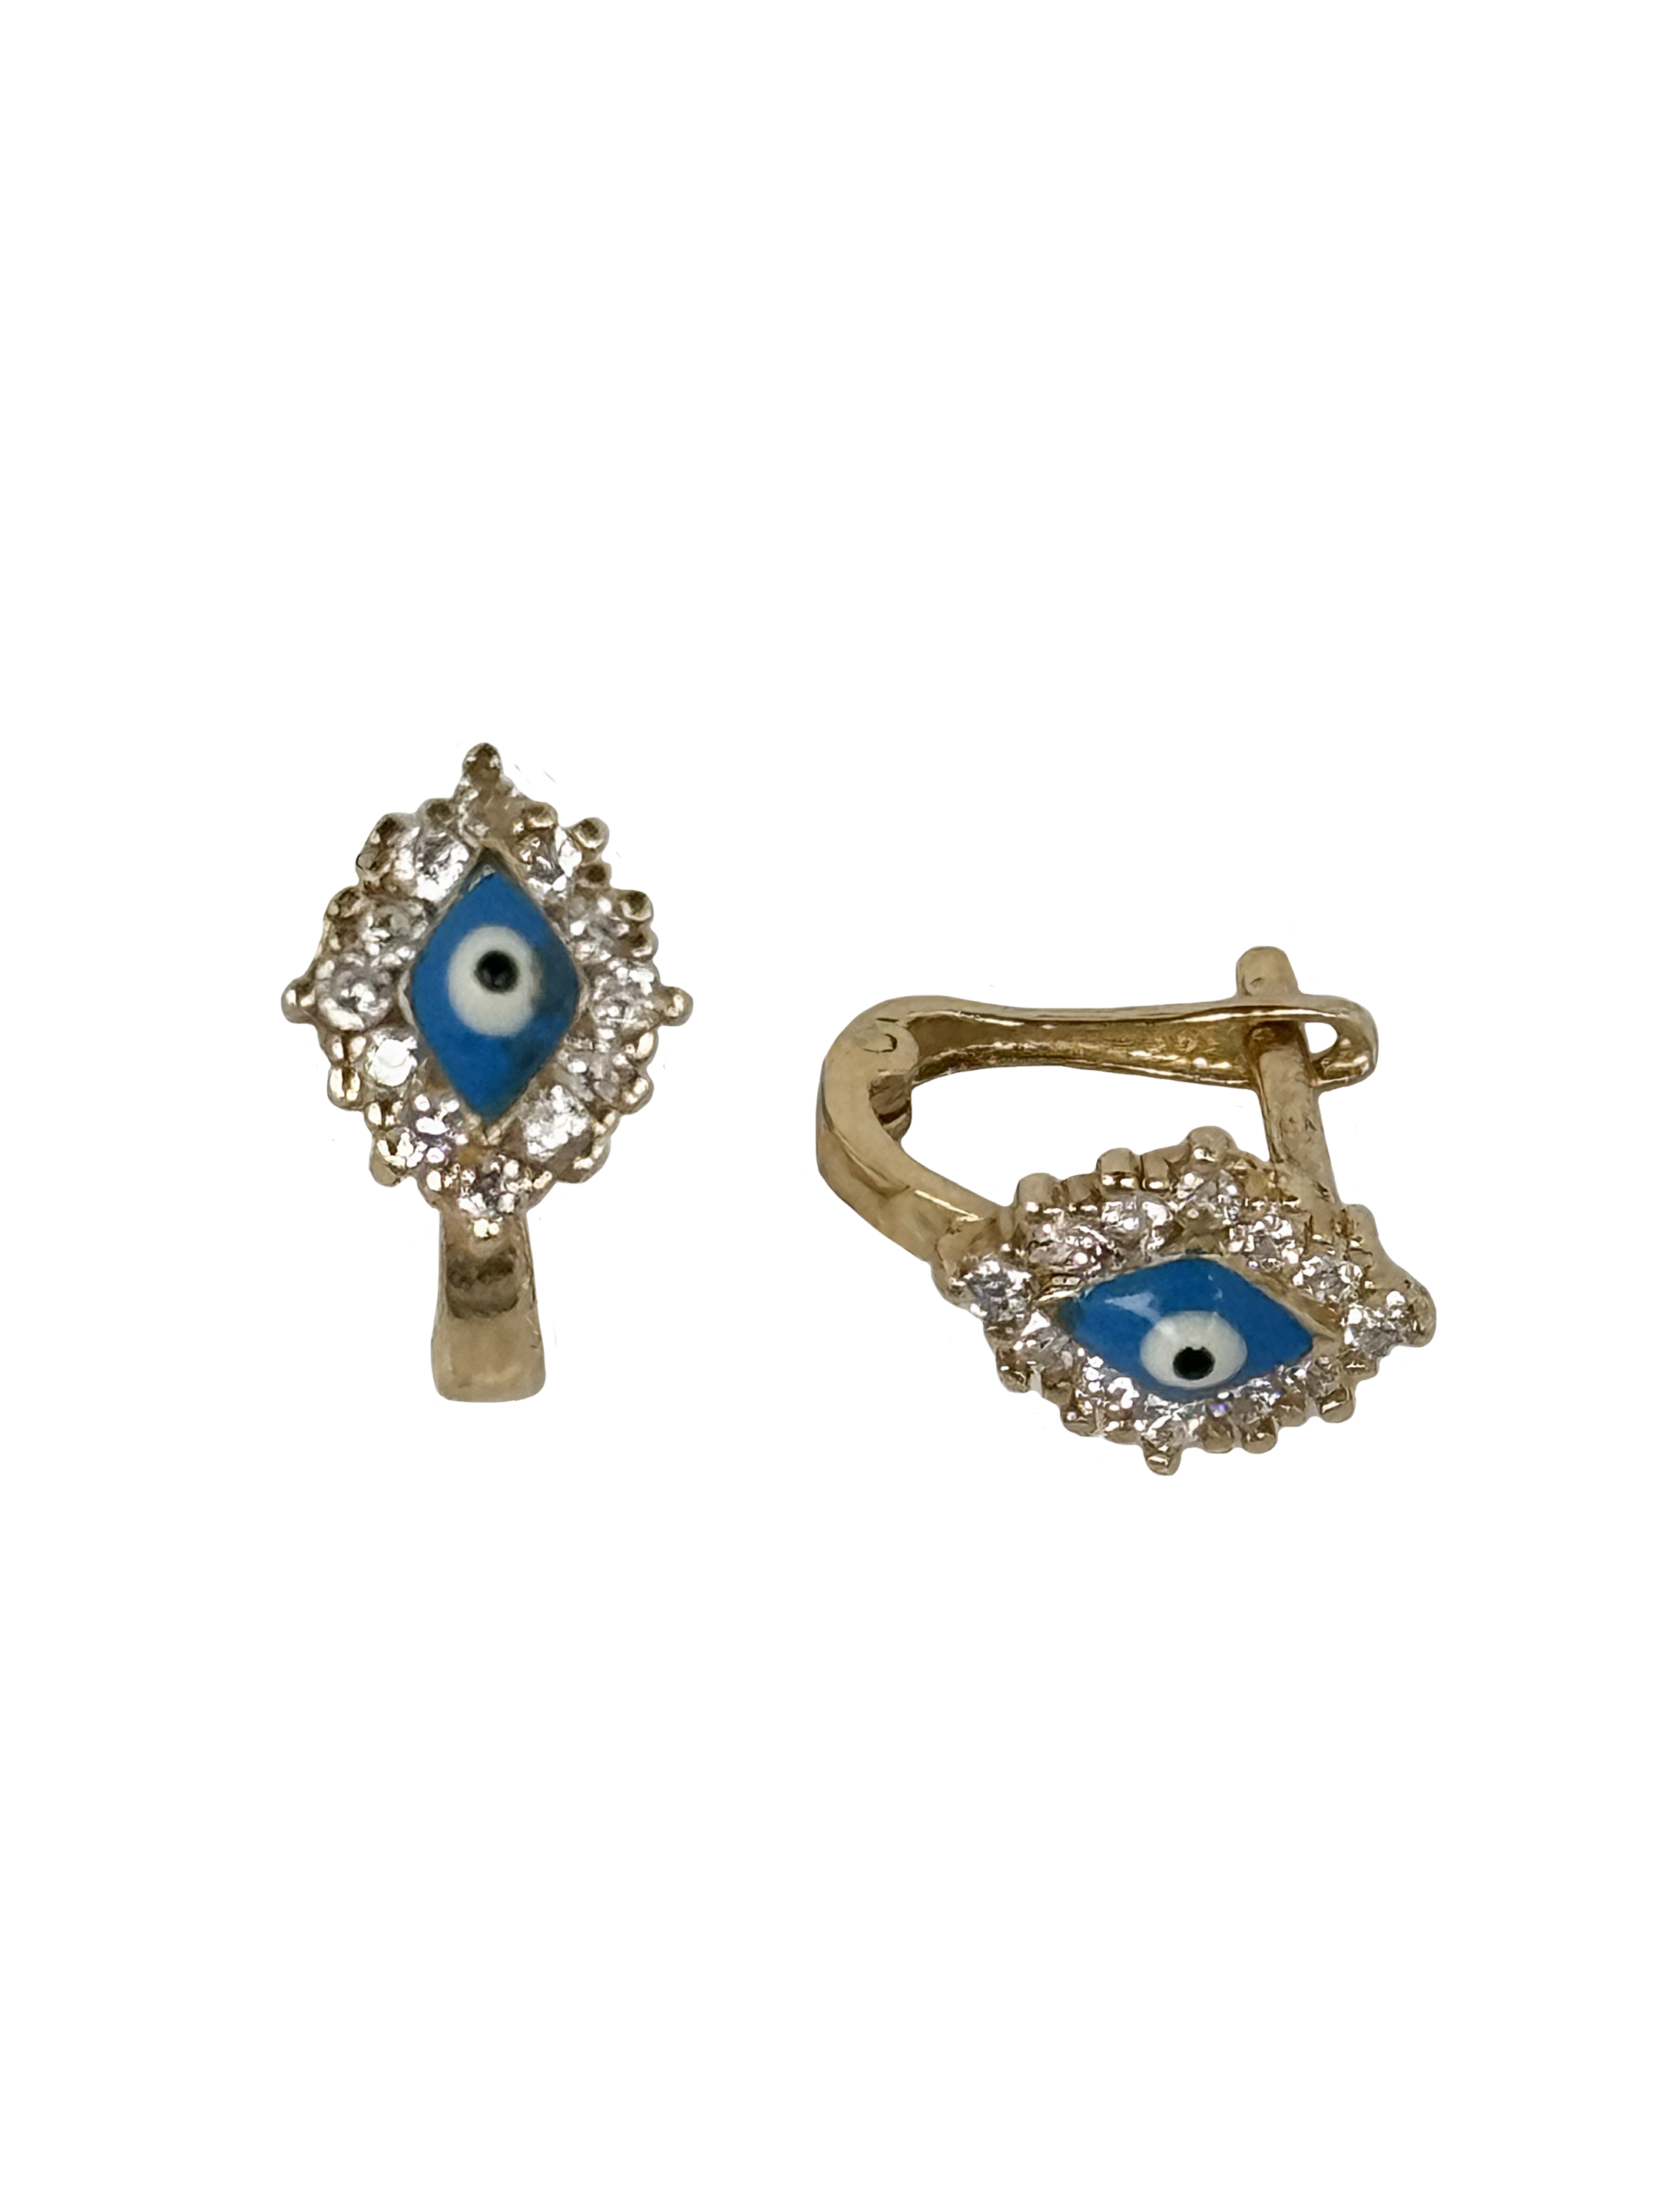 Gold children's earrings with blue Turkish eye and zircons